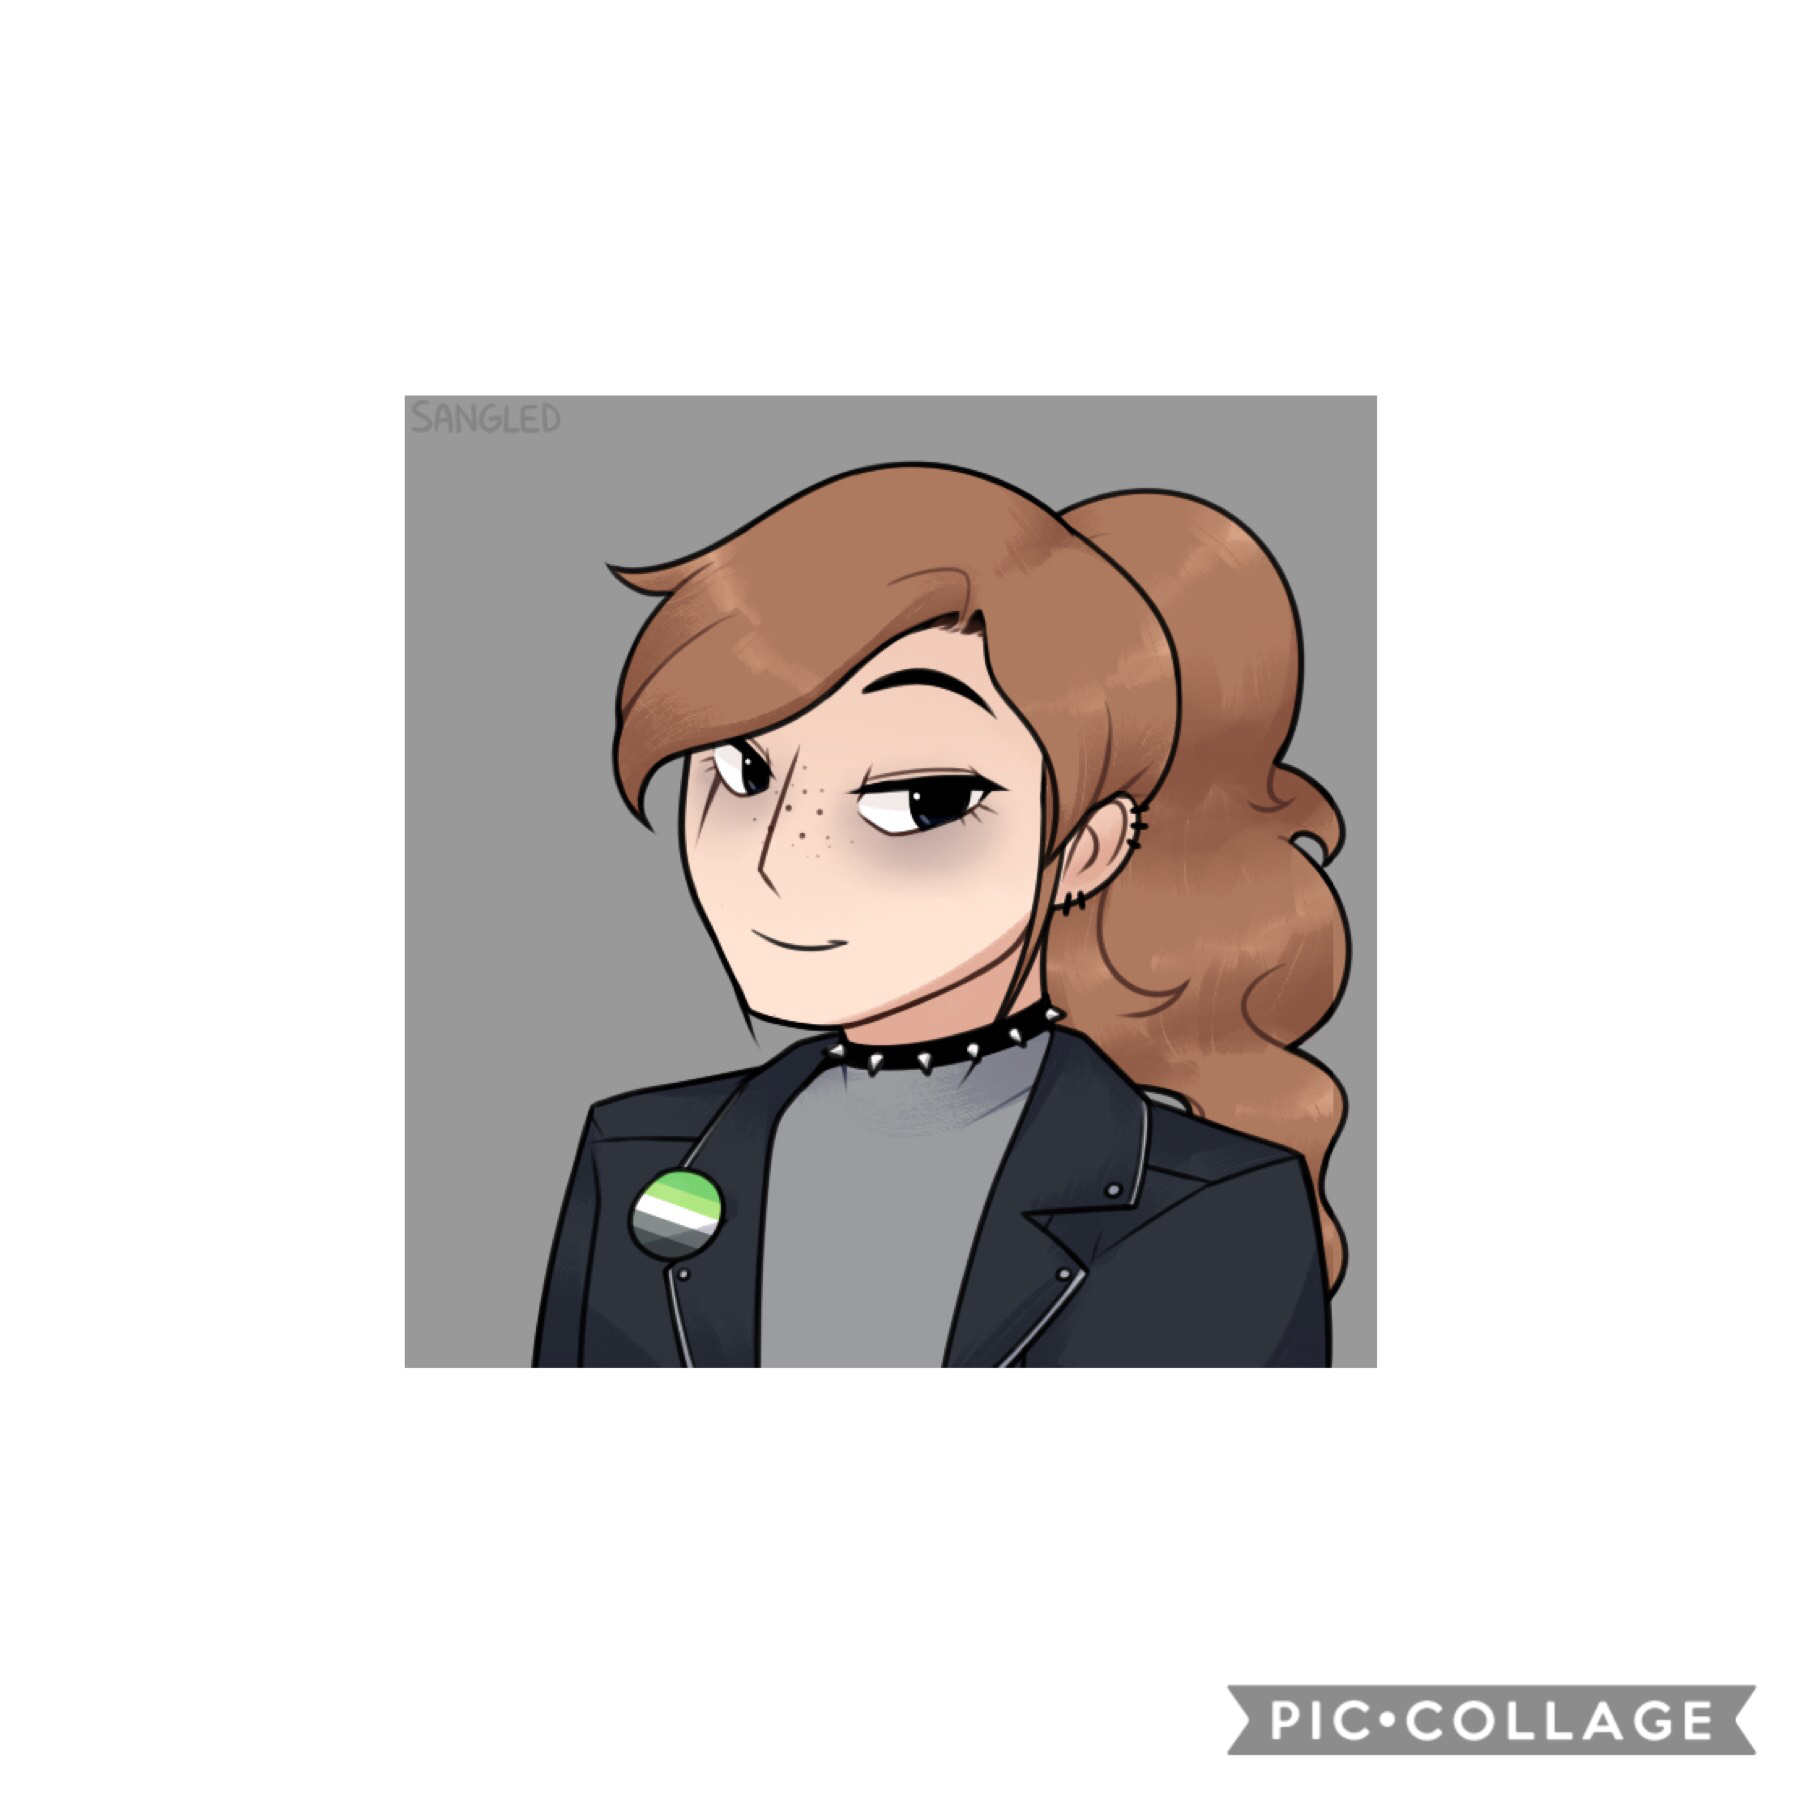 Hi this is my OC Aylo no I didn’t draw this it’s from Picrew 

Aylo is a bAd GiRL

I saw a former crush of mine today
God he’s not gotten any less hot
It’s been a year since I’ve seen him so
